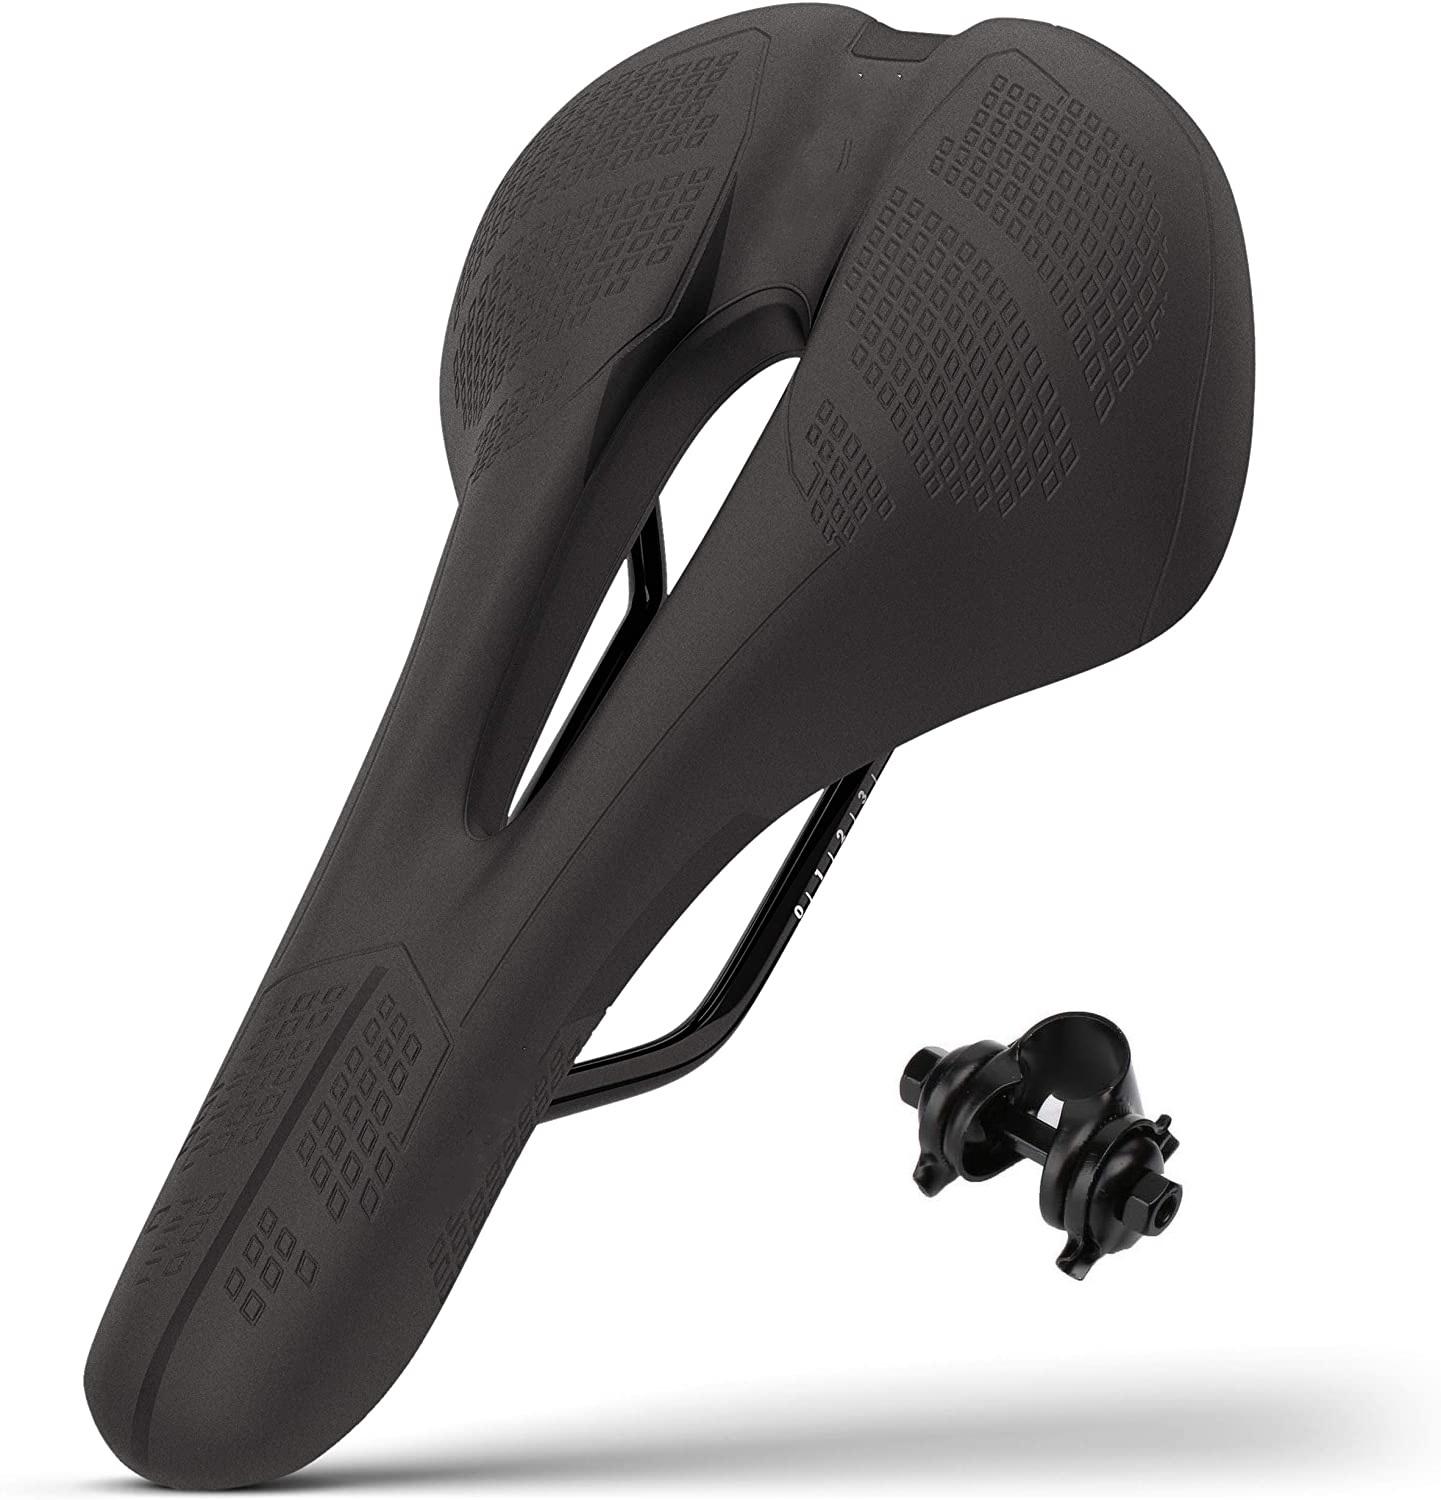 Fitfort Bicycle Seat Pad Soft Padded Extra Wide Comfort Memory Foam Bike Saddle 